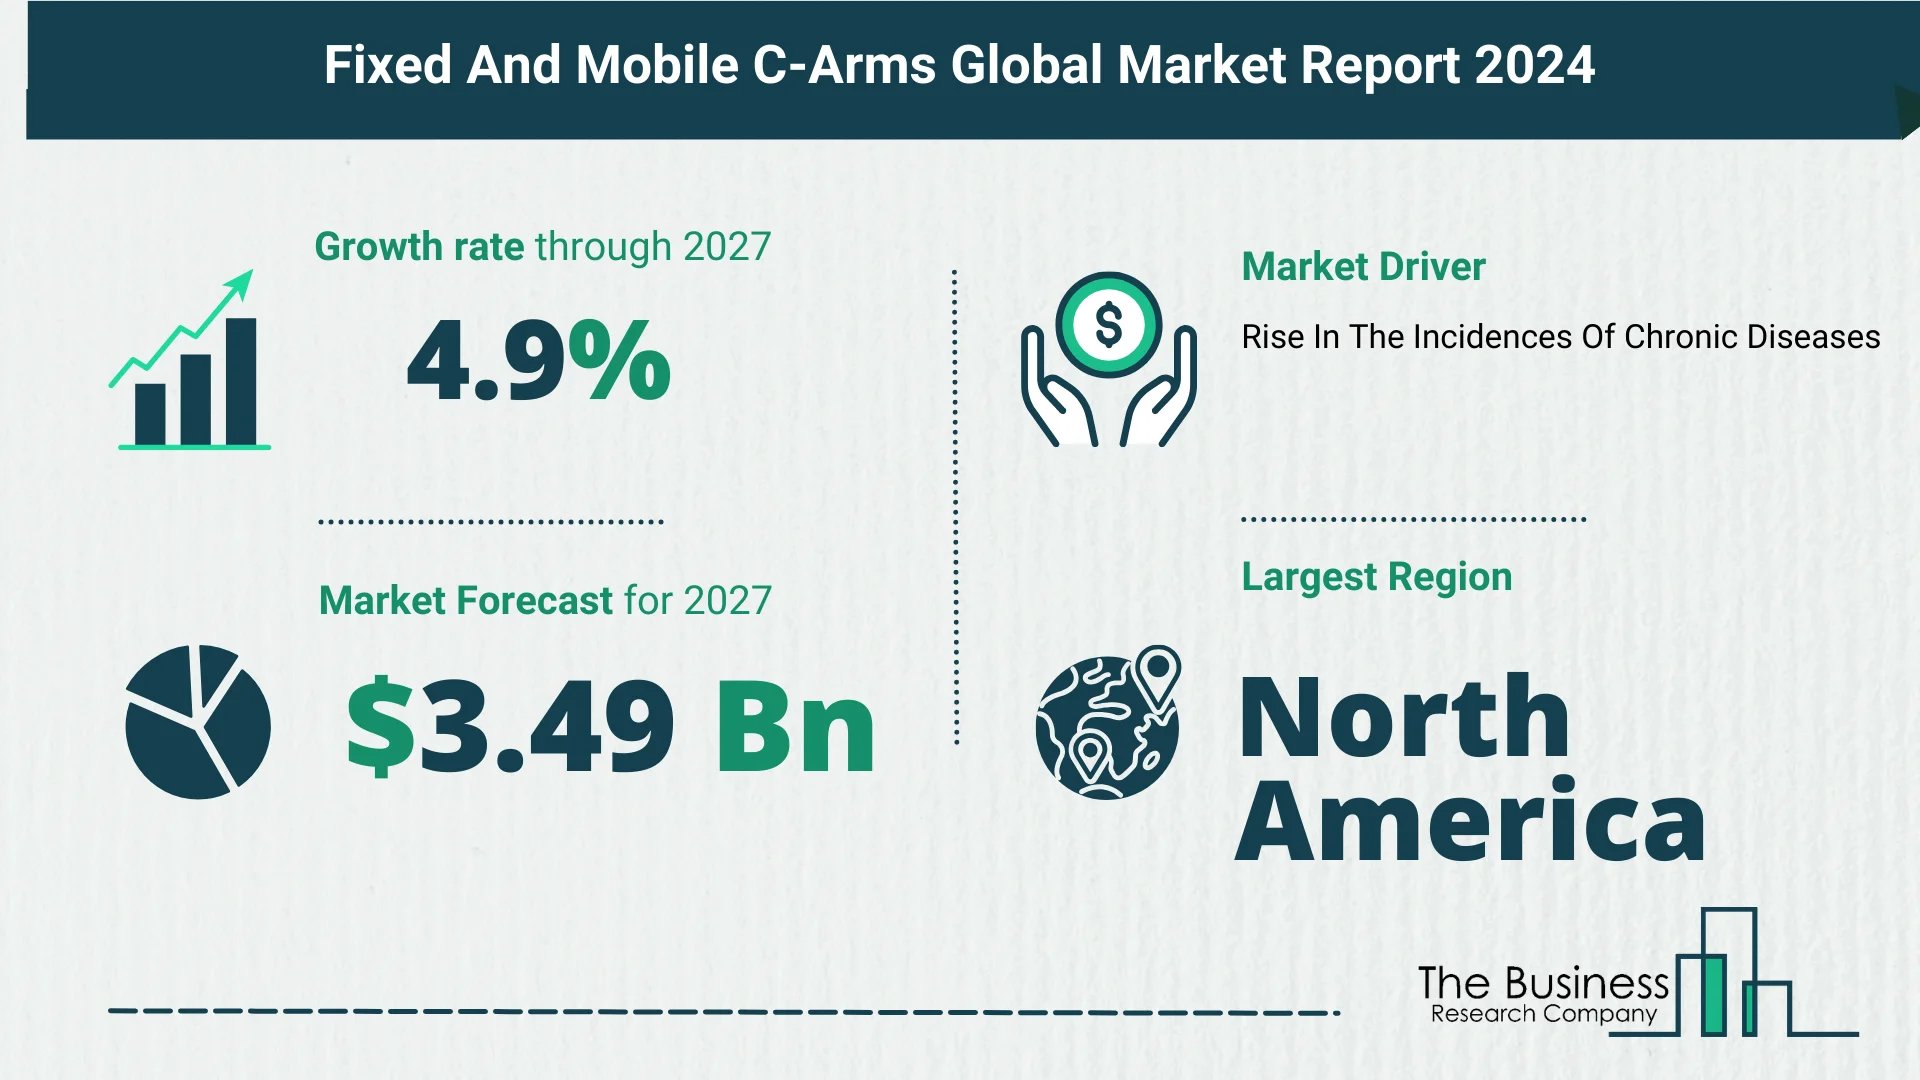 Global Fixed And Mobile C-Arms Market Size